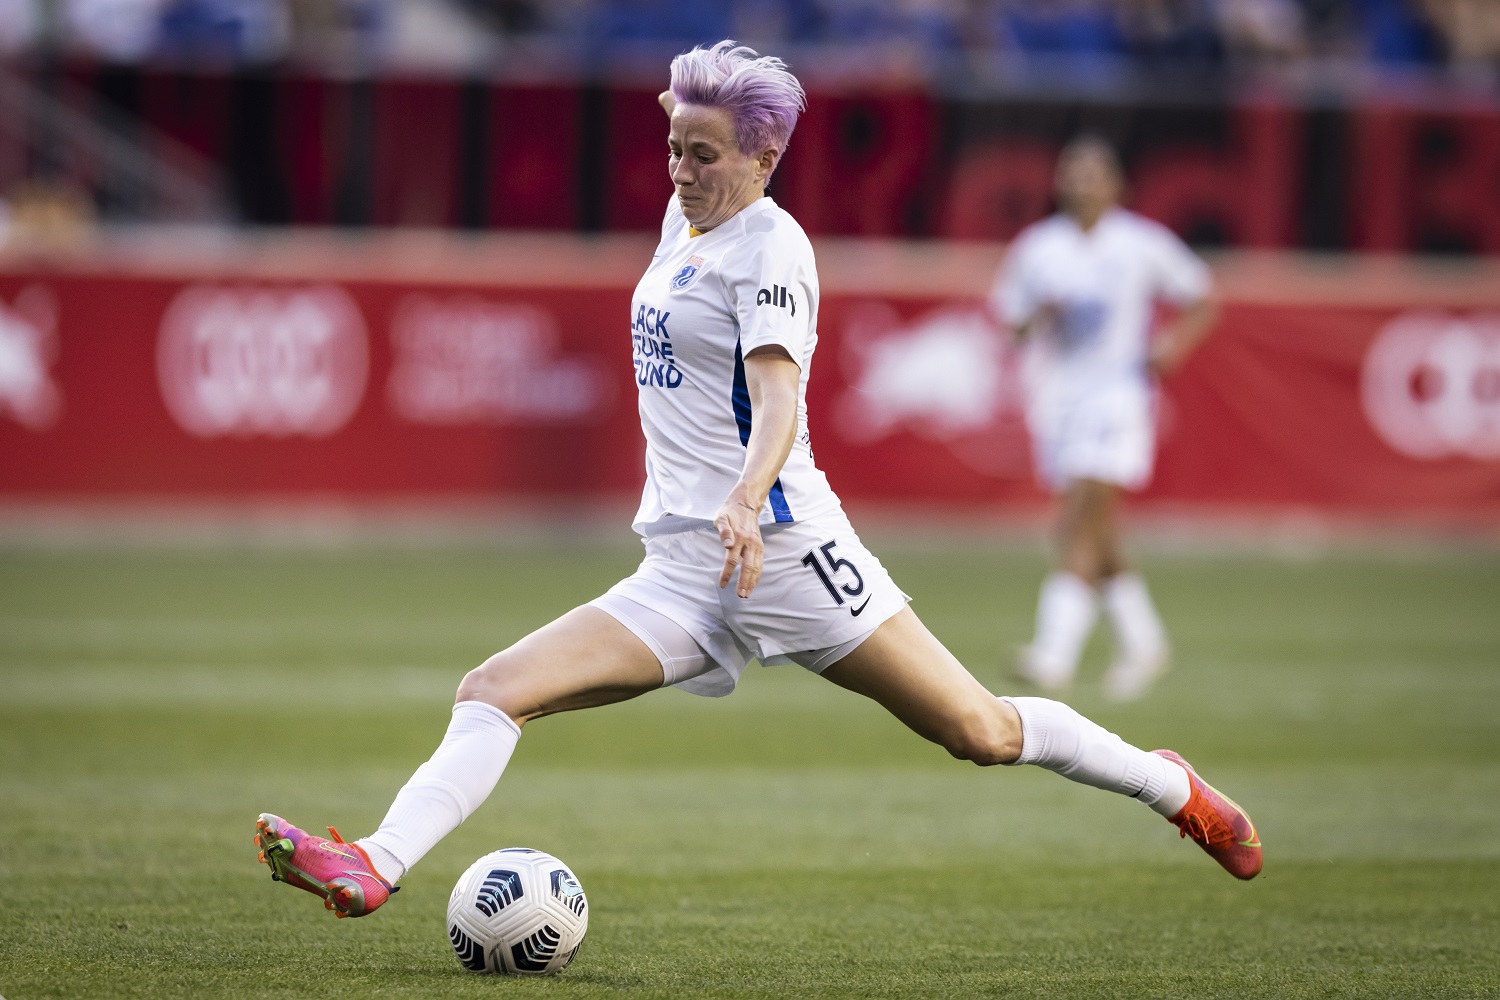 Megan Rapinoe has made 177 appearances for the U.S. Women's National Team and scored 59 goals. | Ira L. Black - Corbis/Getty Images